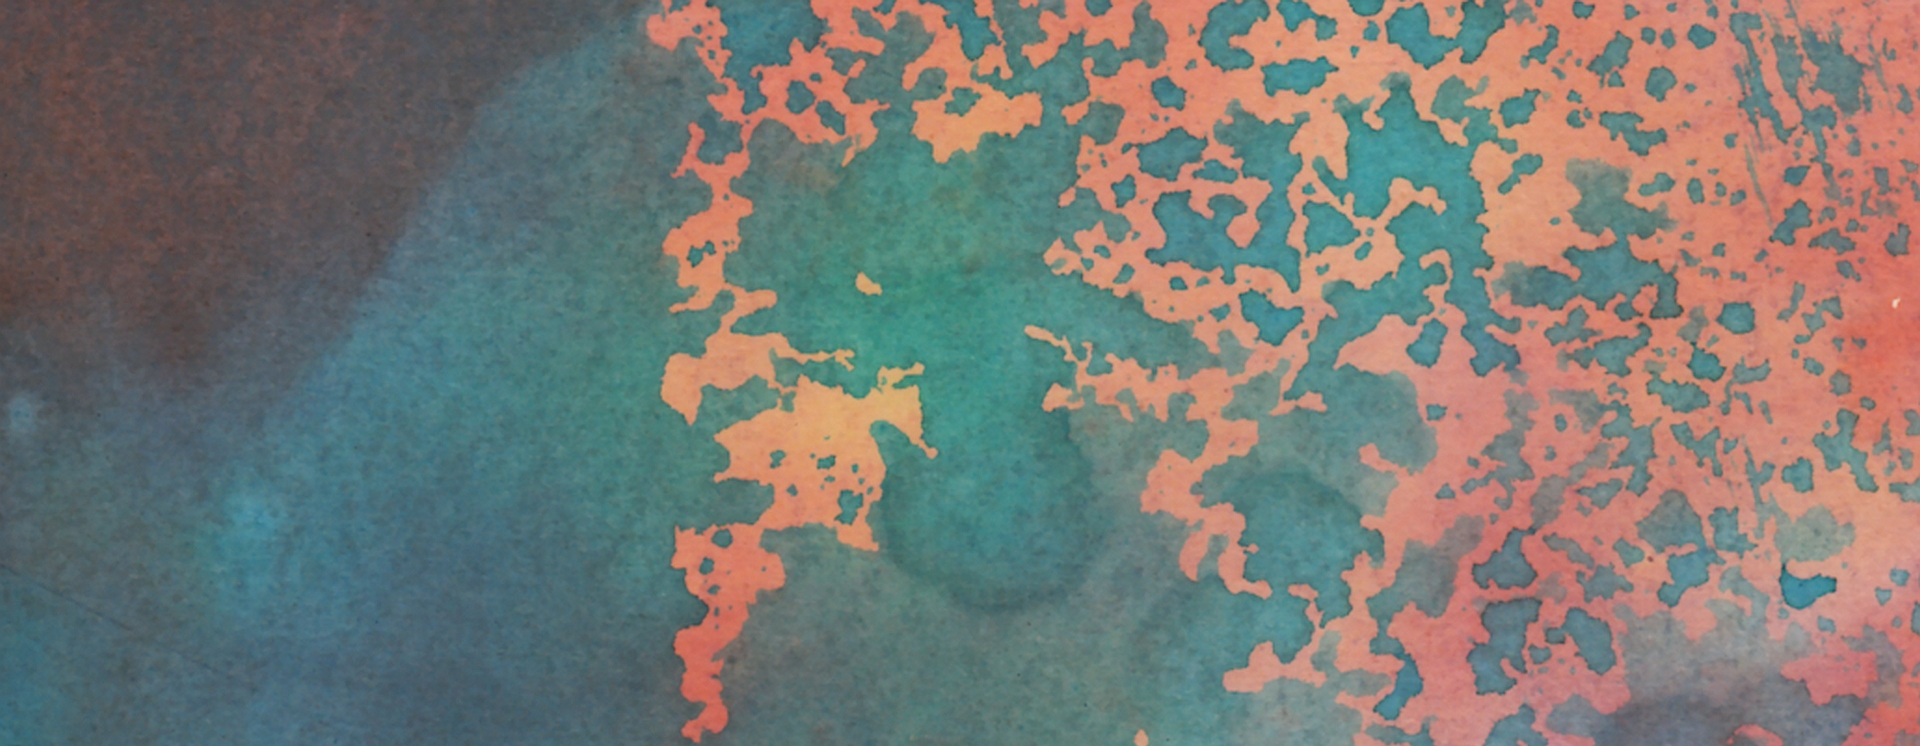 A stylised global map in orange set against a blue-green background